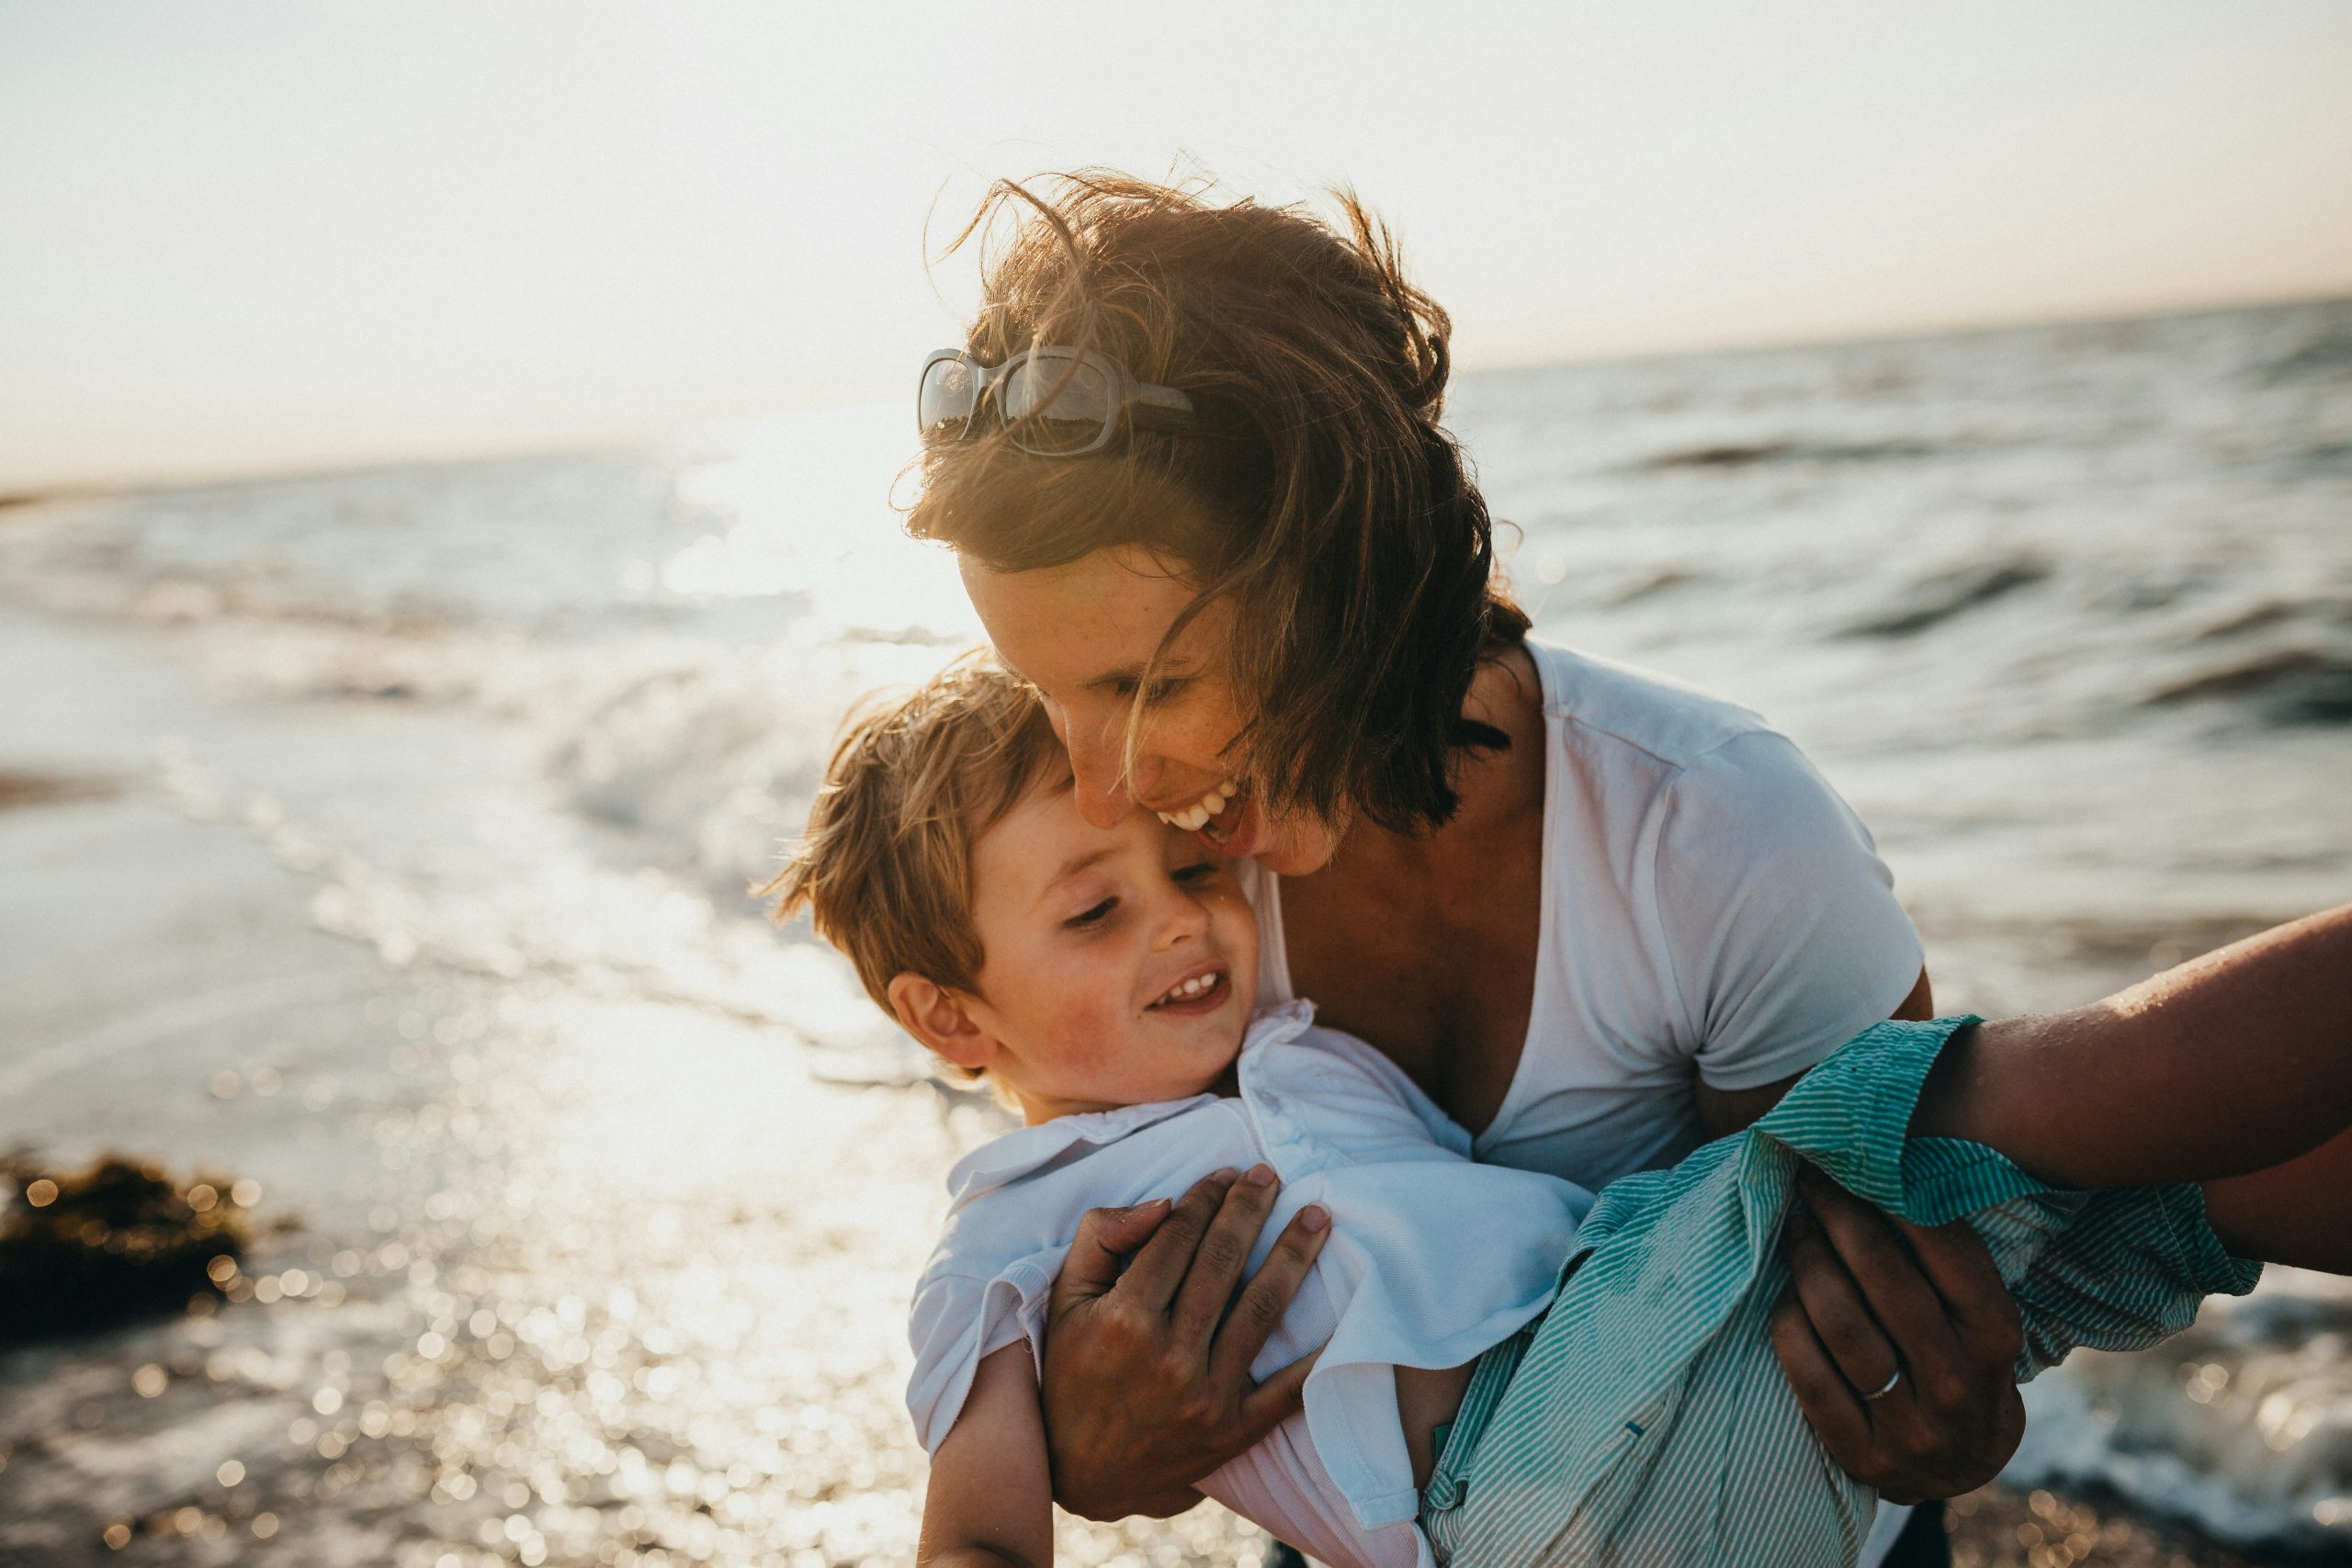 discover effective parenting tips and tricks with our top parenting hacks. learn how to simplify your parenting journey and make the most out of every moment with your kids.